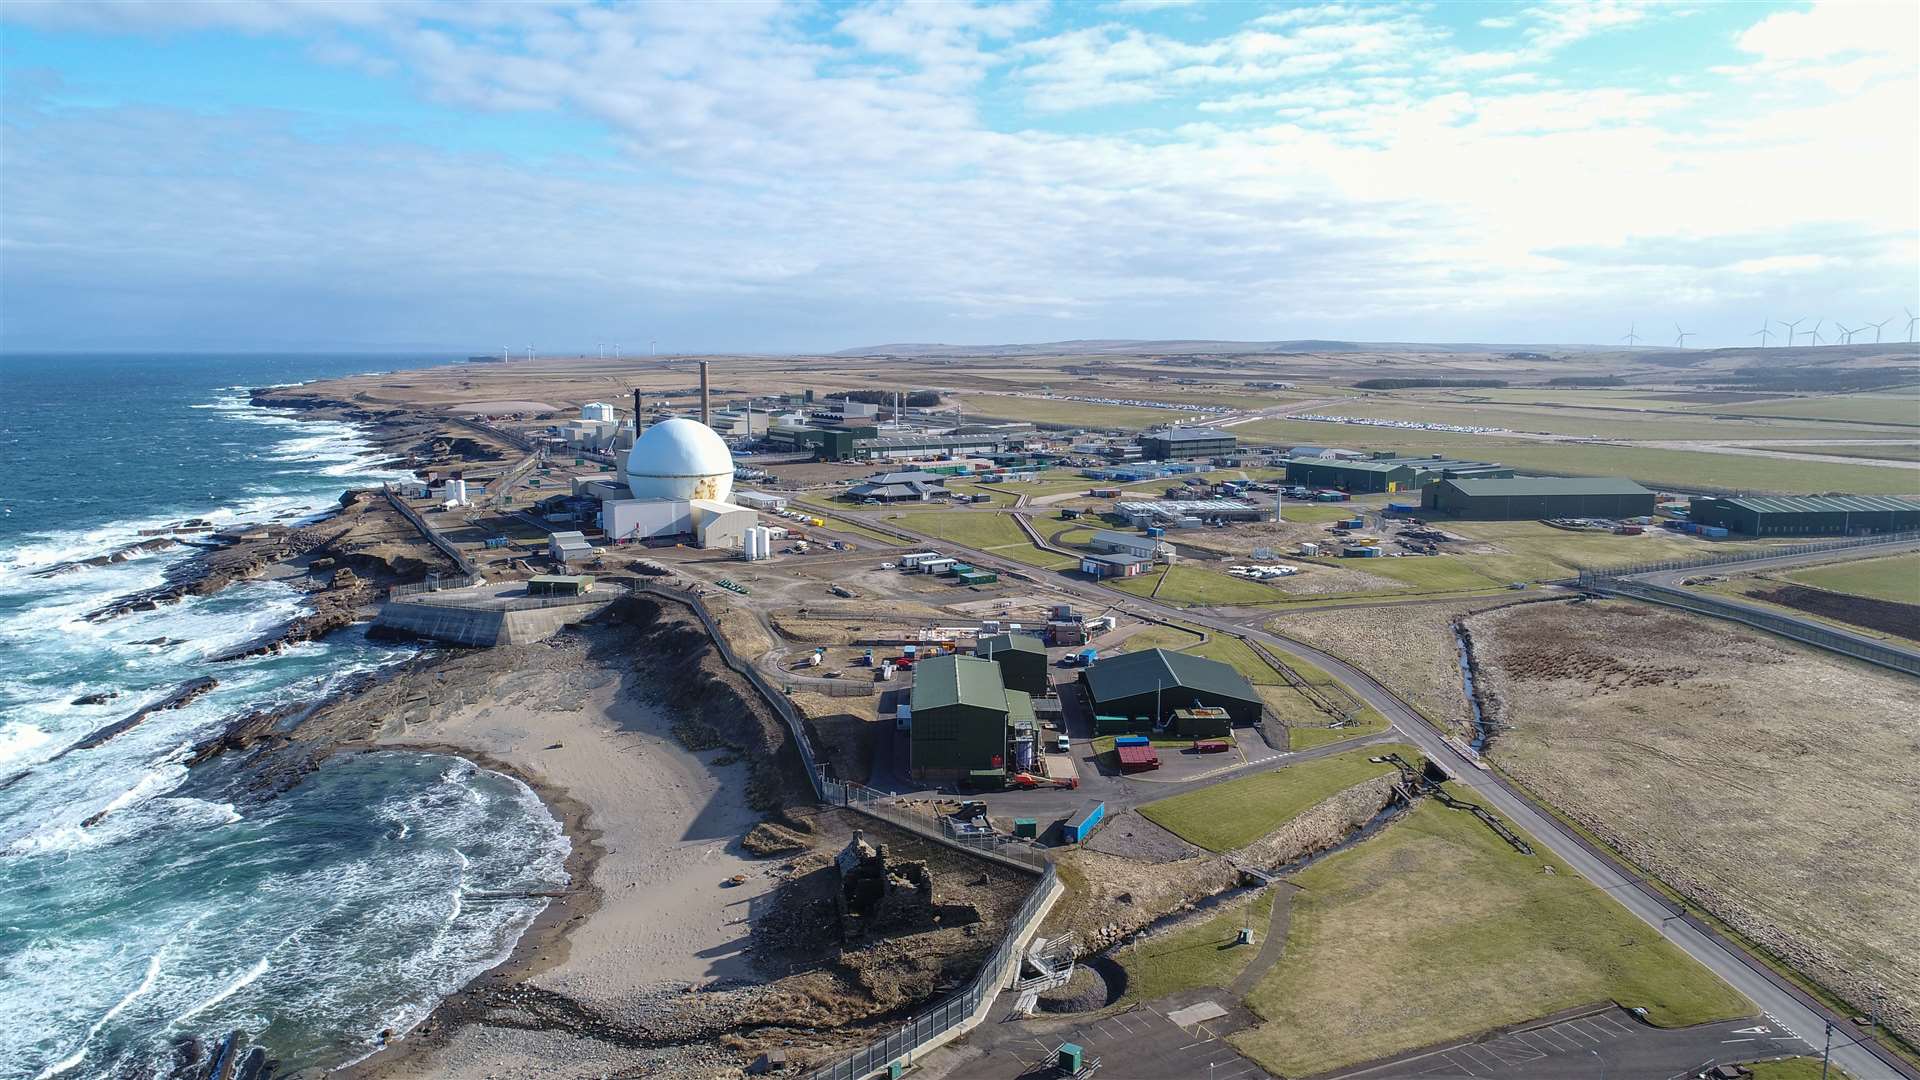 The site for the onshore development lies to the west of the former Dounreay nuclear plant.